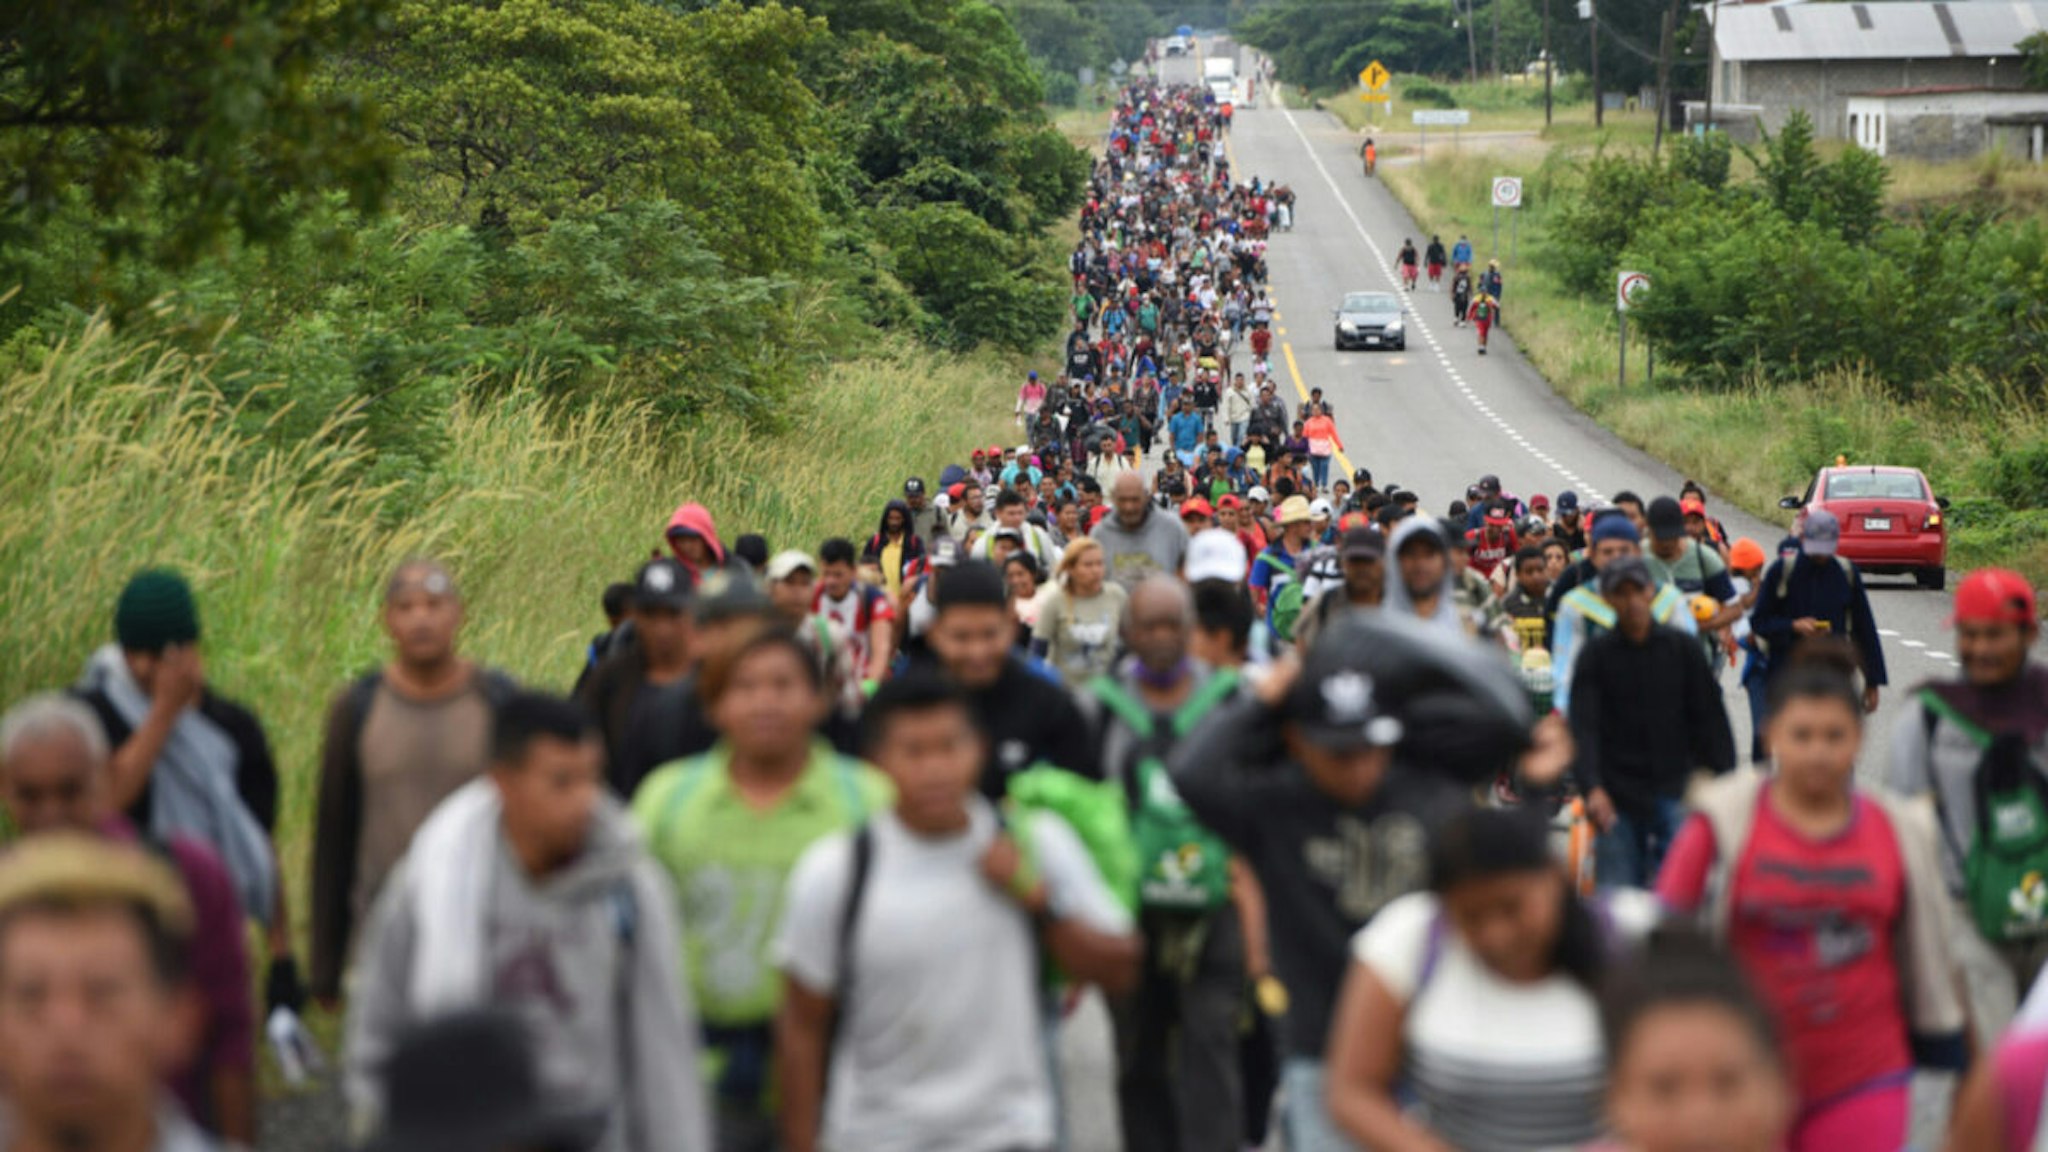 Numerous people from Central America walk together along a rural road towards the US border.